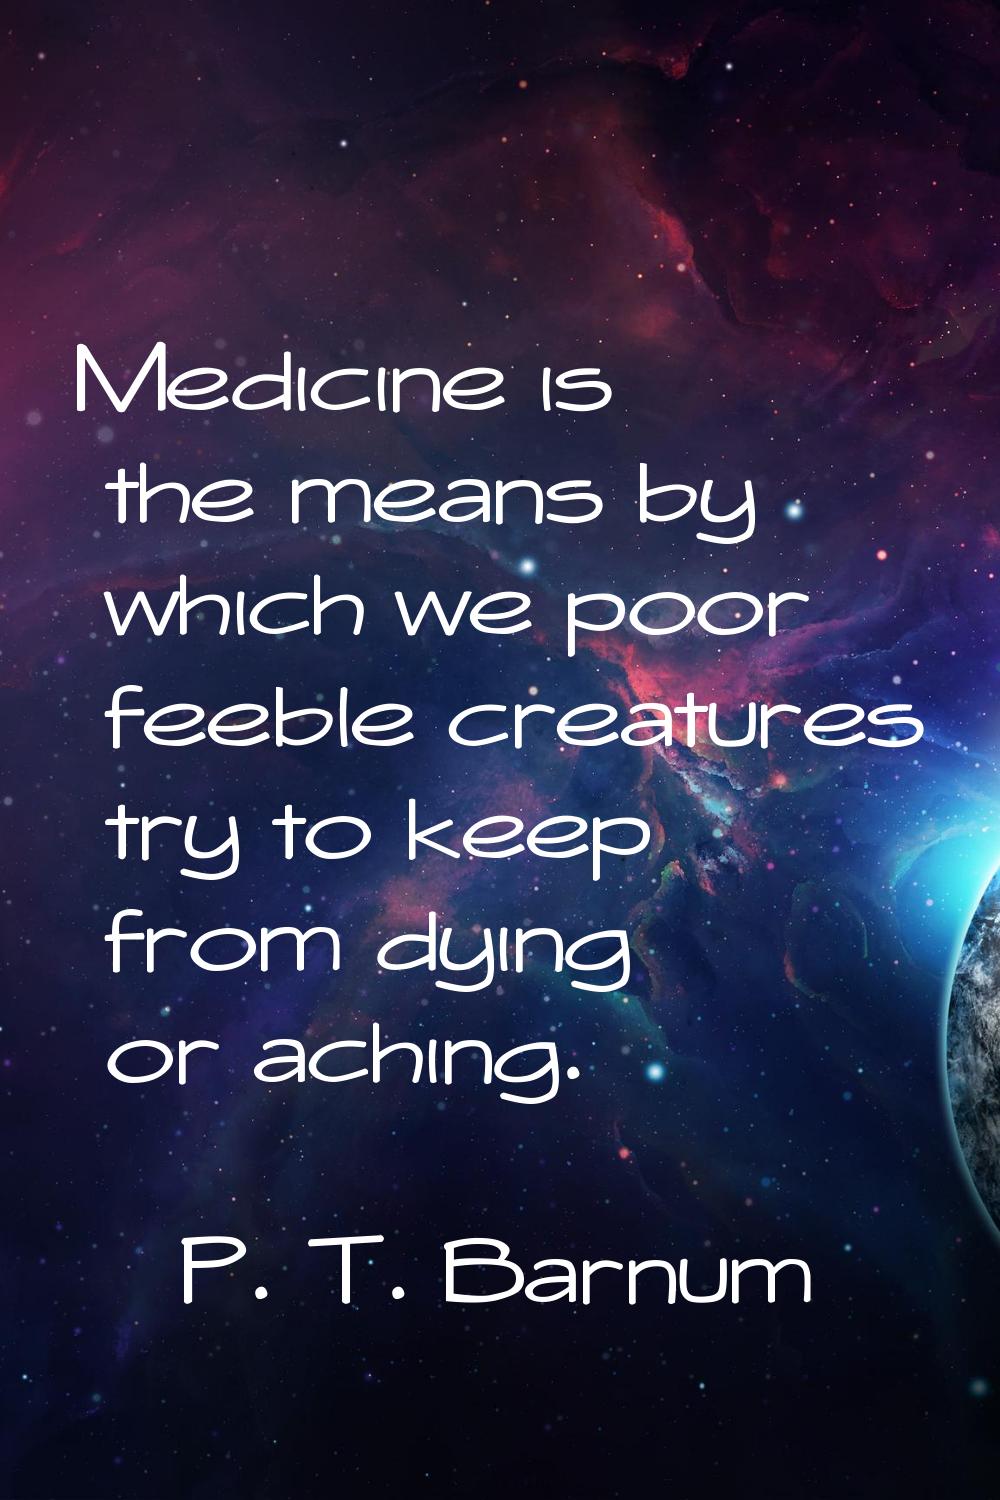 Medicine is the means by which we poor feeble creatures try to keep from dying or aching.